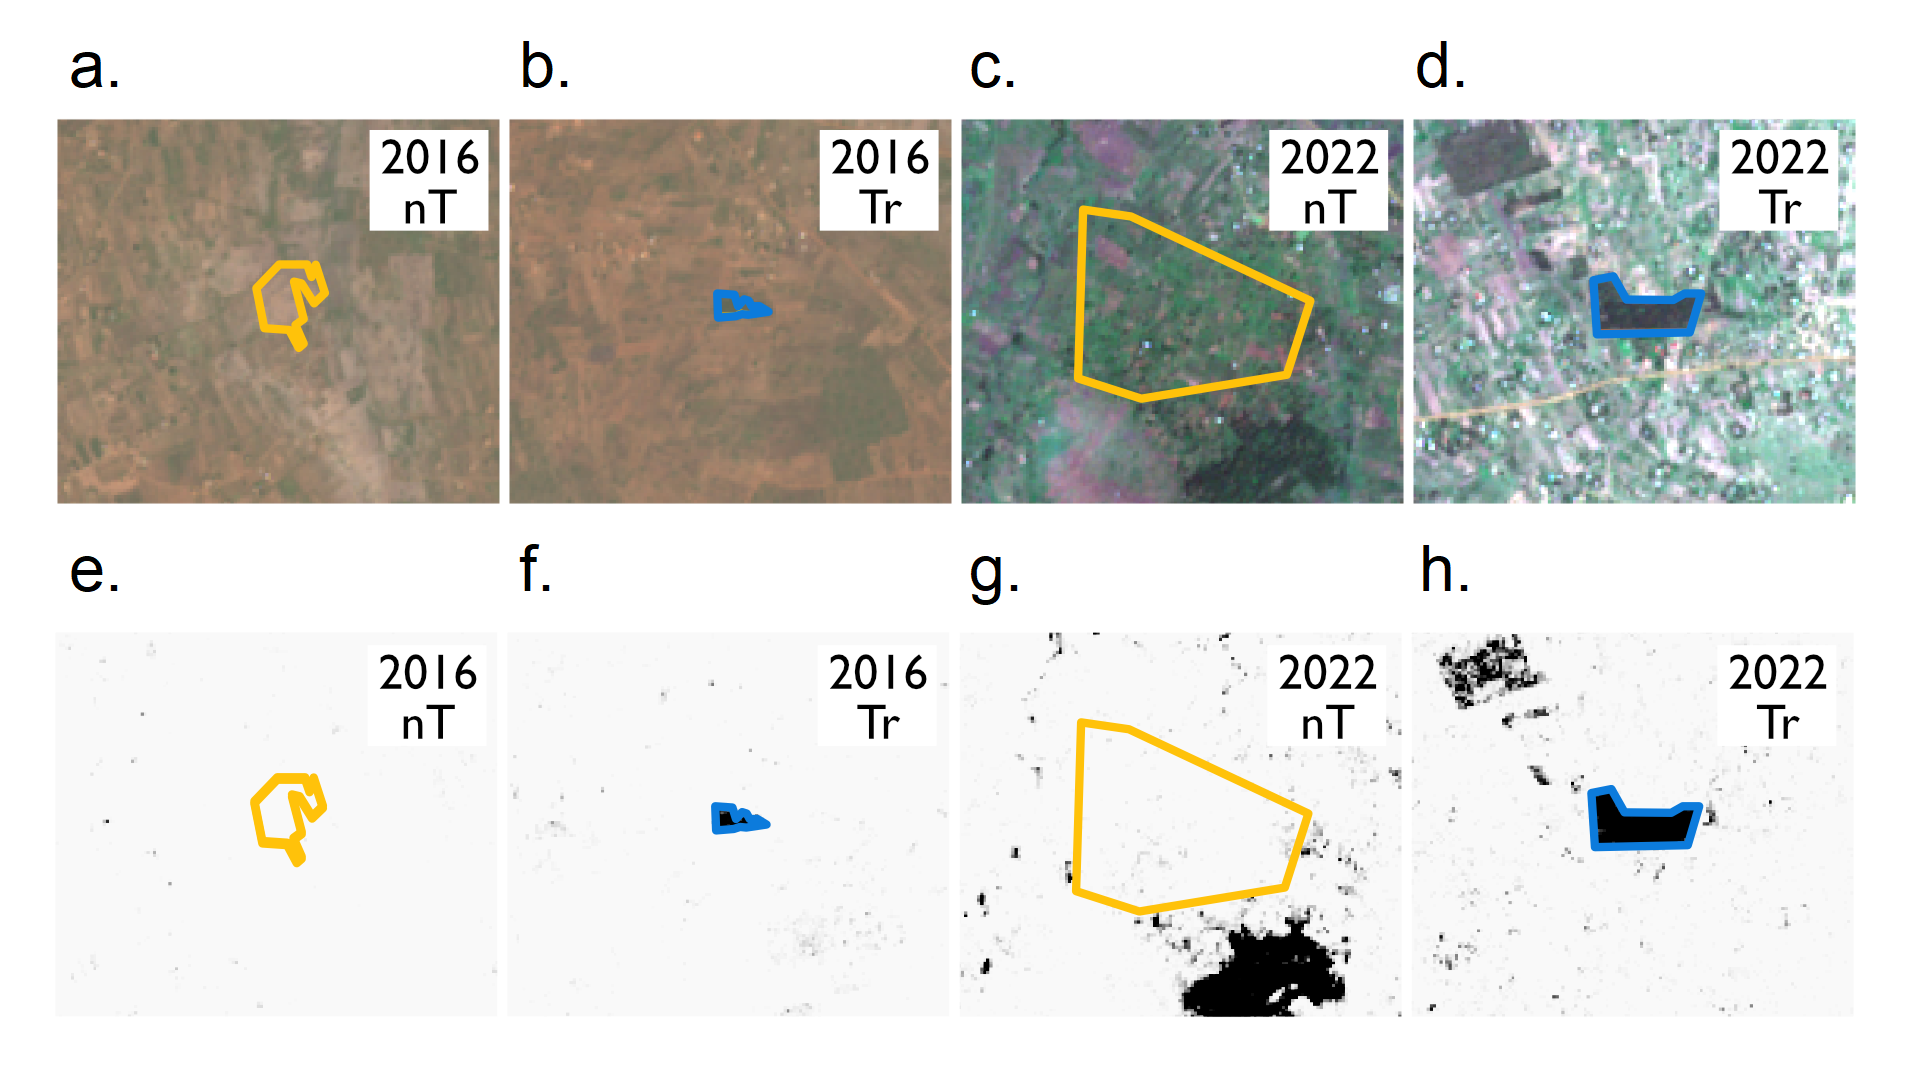 An eight-panel image showing areas used to train the model to detect tree and non-tree areas. The top row are four images of satellite images. The bottom row shows whether the model has predicted areas are tree or non-tree. Each column has an area used for model training. The first column shows a manually derived non-tree area from 2016. The second column shows a tree area from 2016. The third column shows a non-tree area from 2022. The fourth column shows a tree area from 2022.